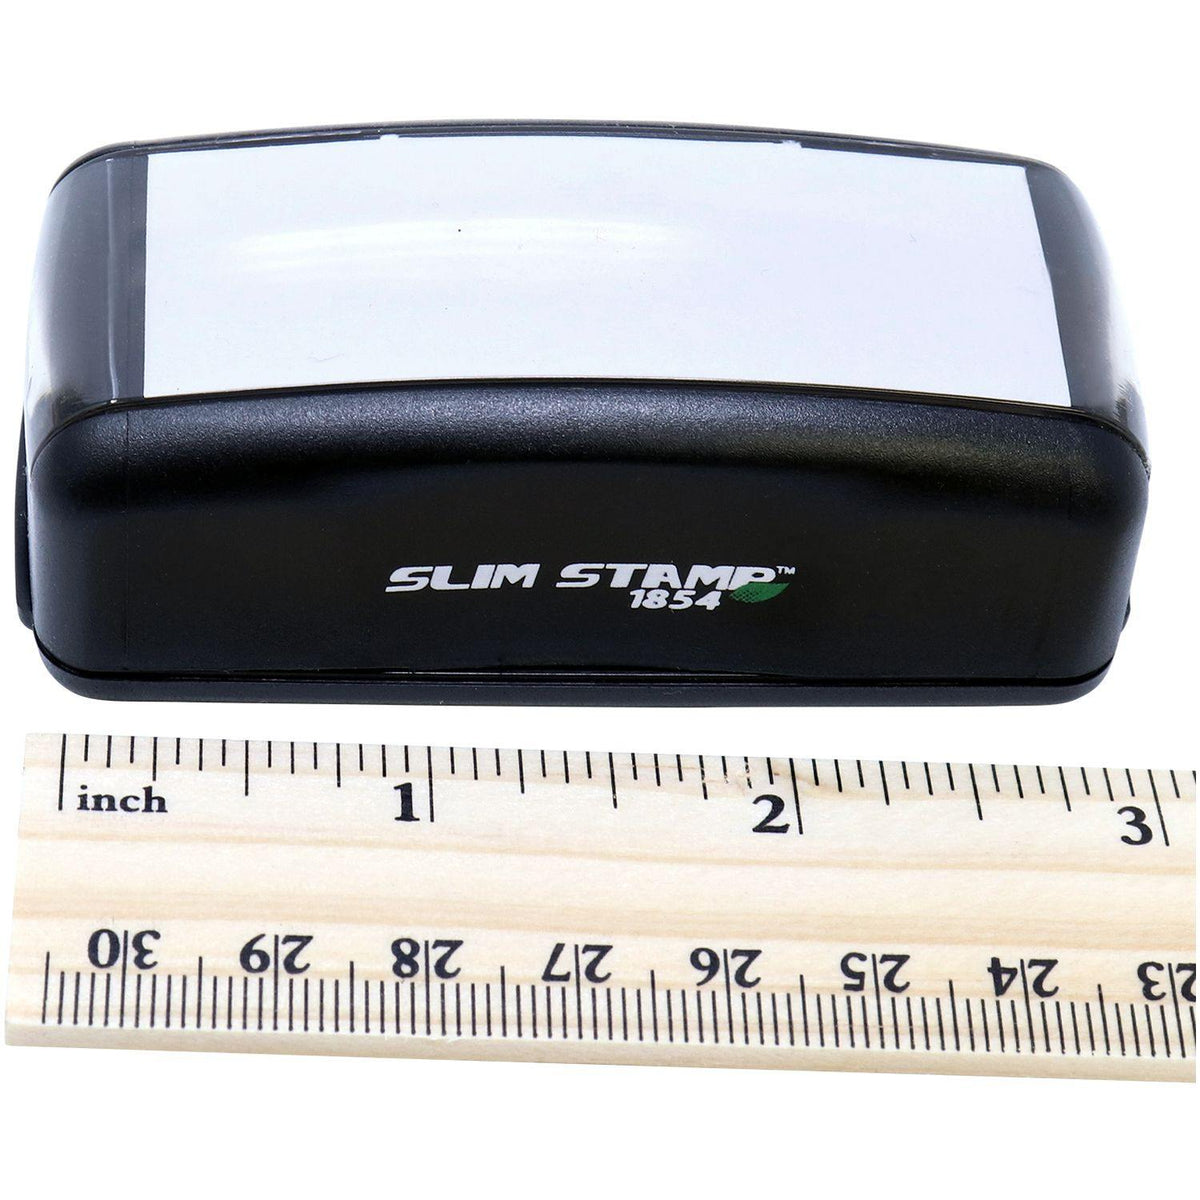 Measurement Large Pre-Inked Received with Line Stamp with Ruler